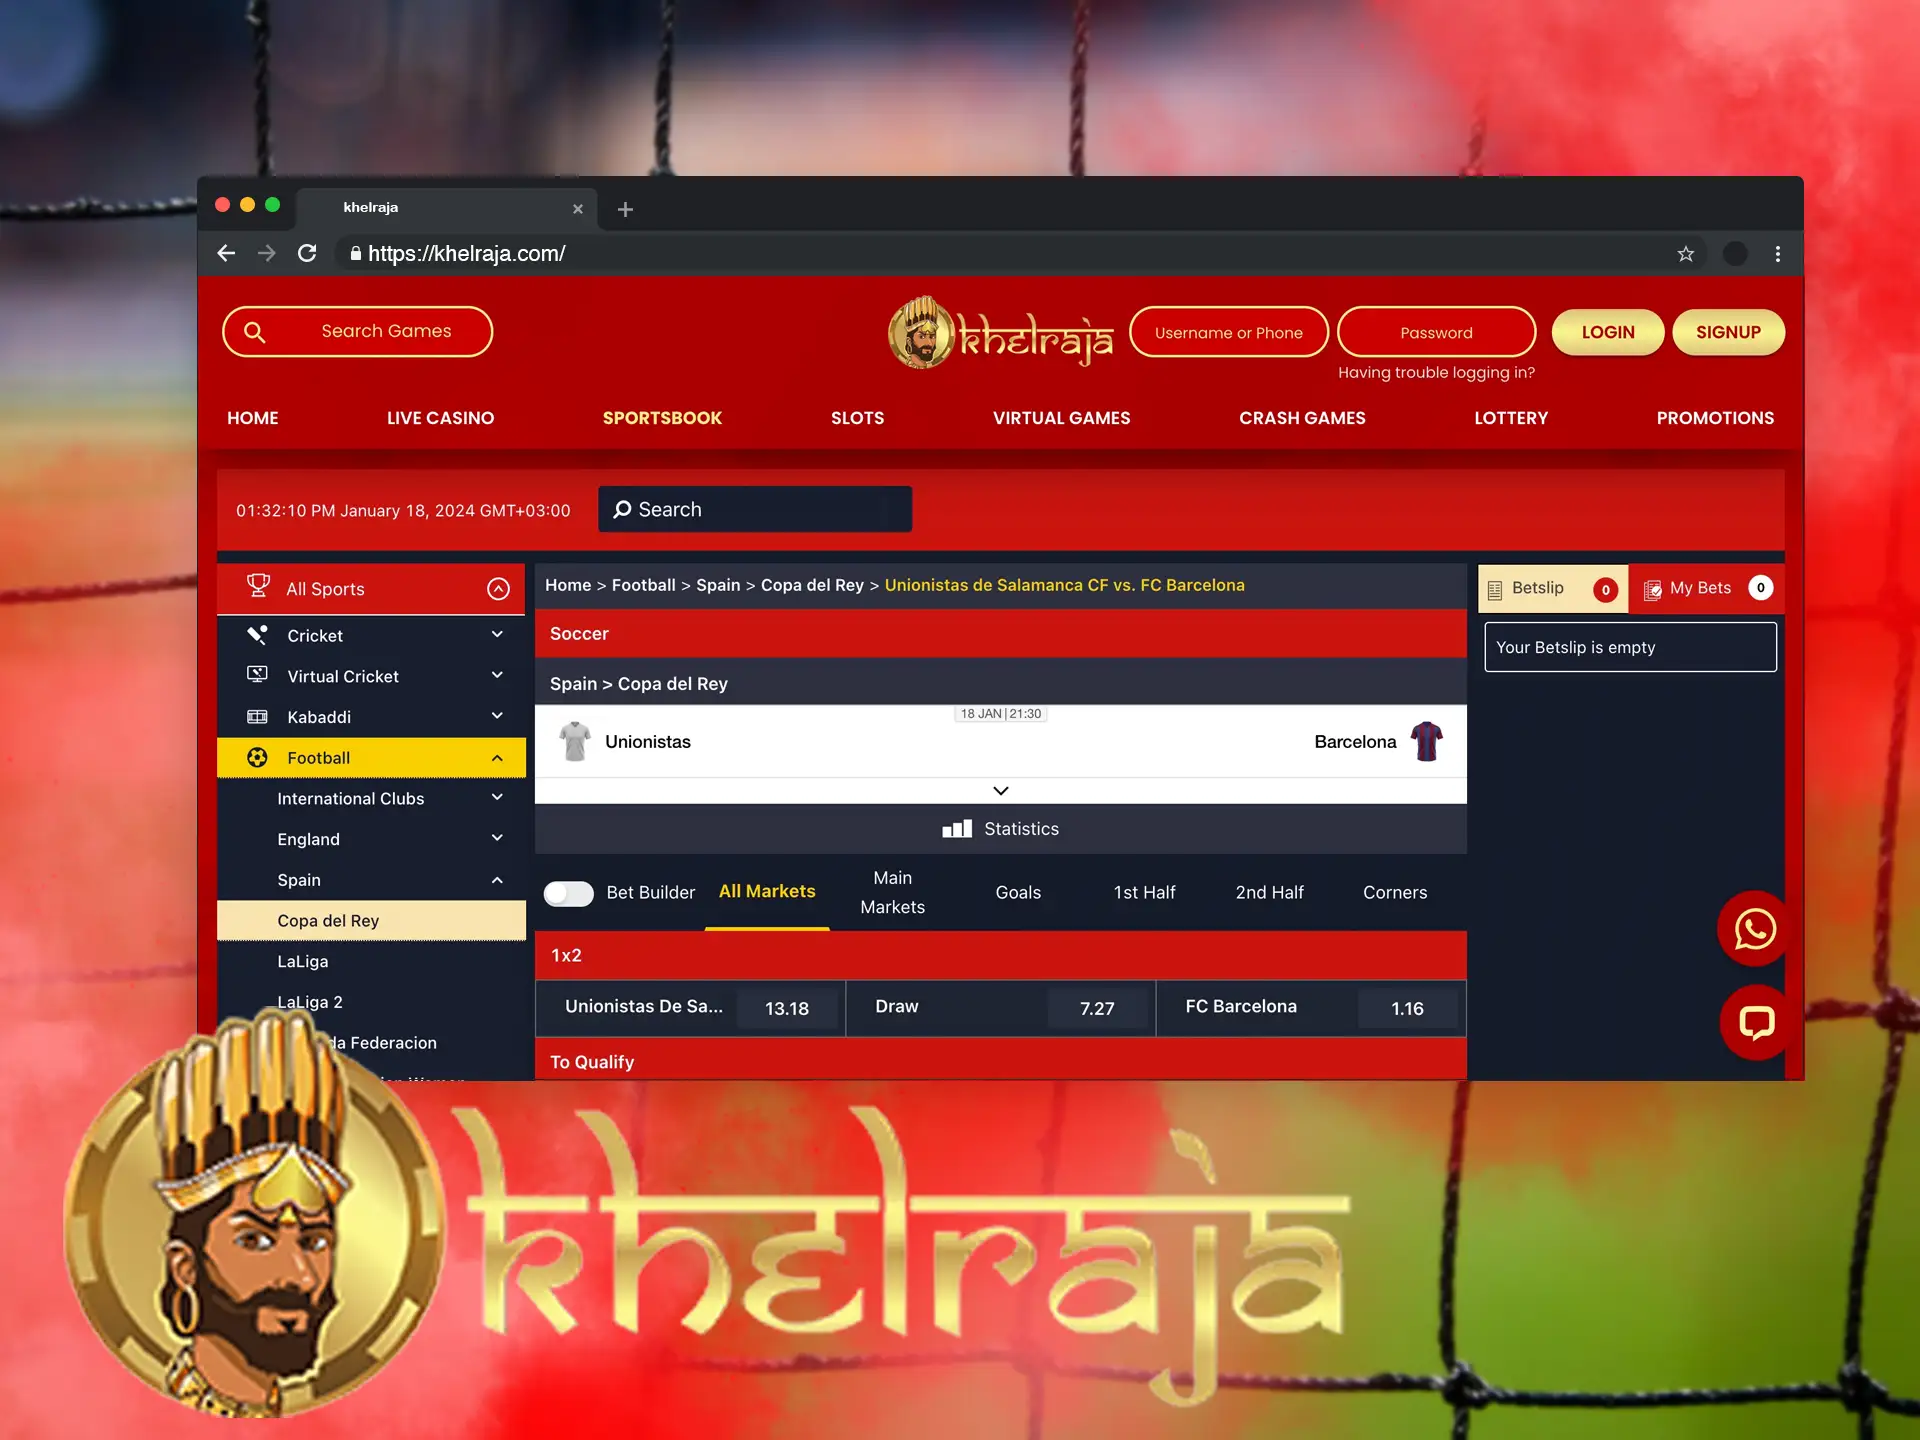 You can watch the match and stay updated with all the latest sporting events on Khelraja website.